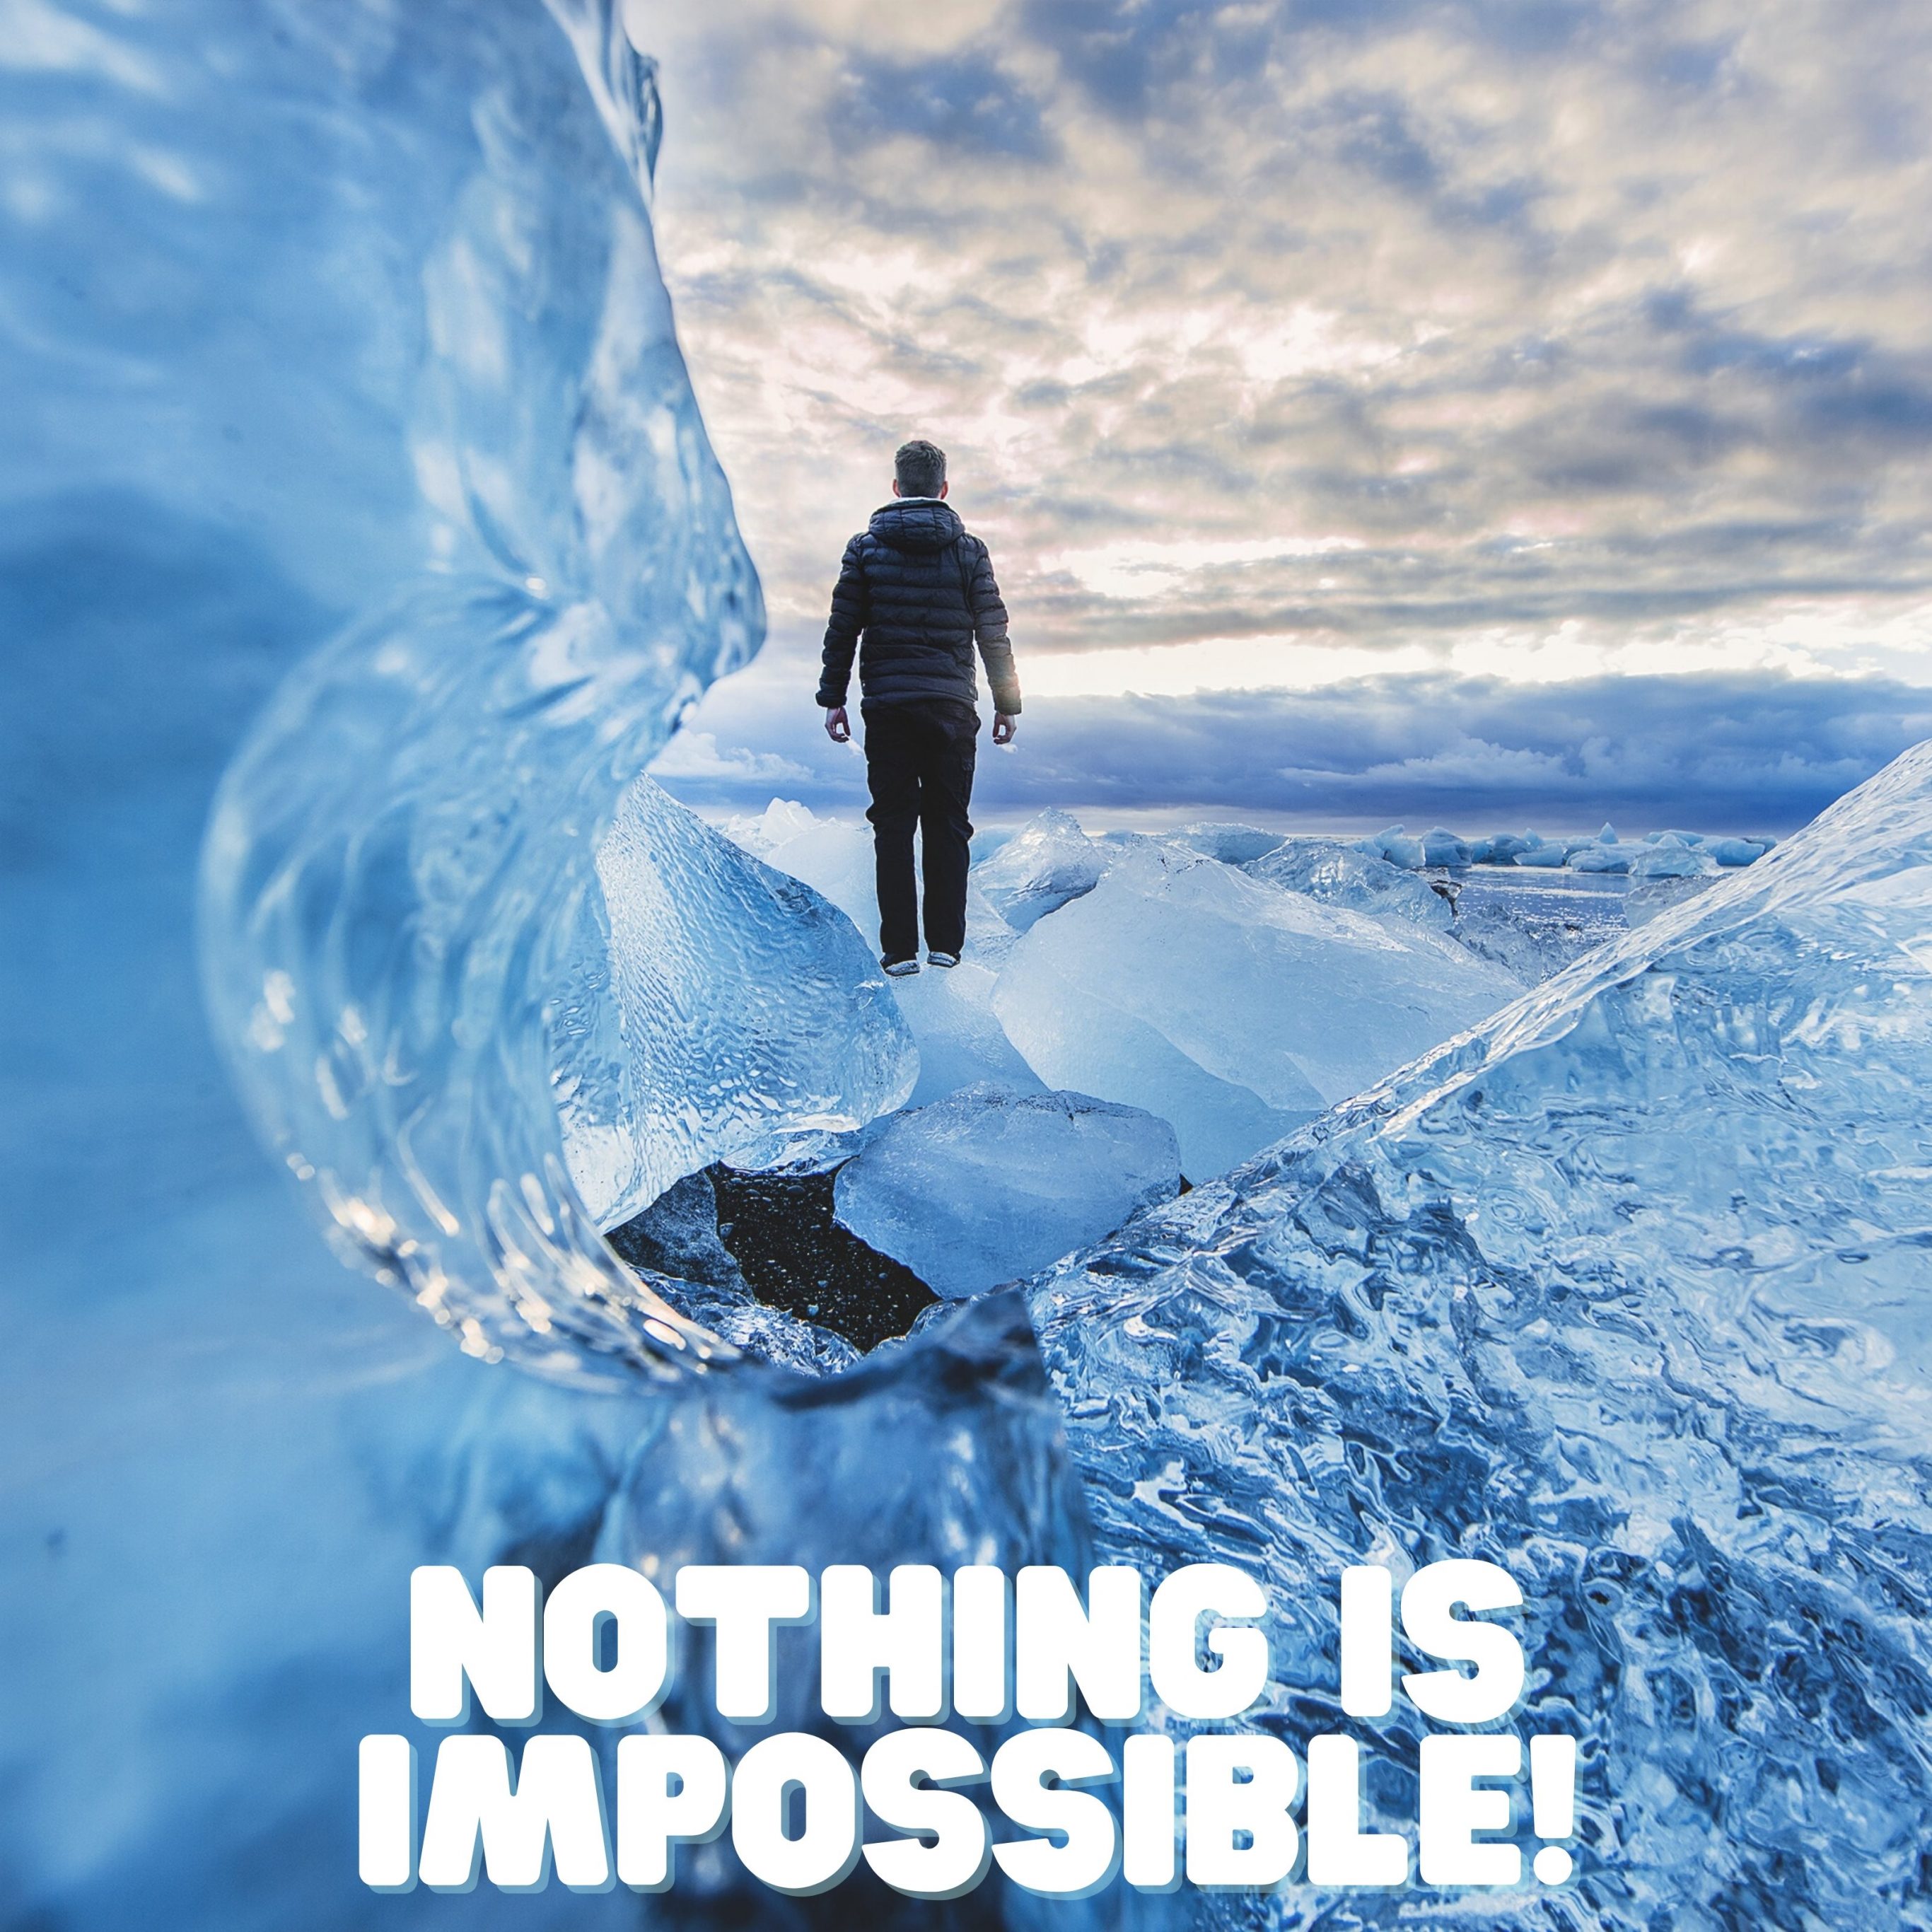 2732x2732 wallpapers 4k iPad Pro Nothing Is Impossible Quote iPad Wallpaper 2732x2732 pixels resolution